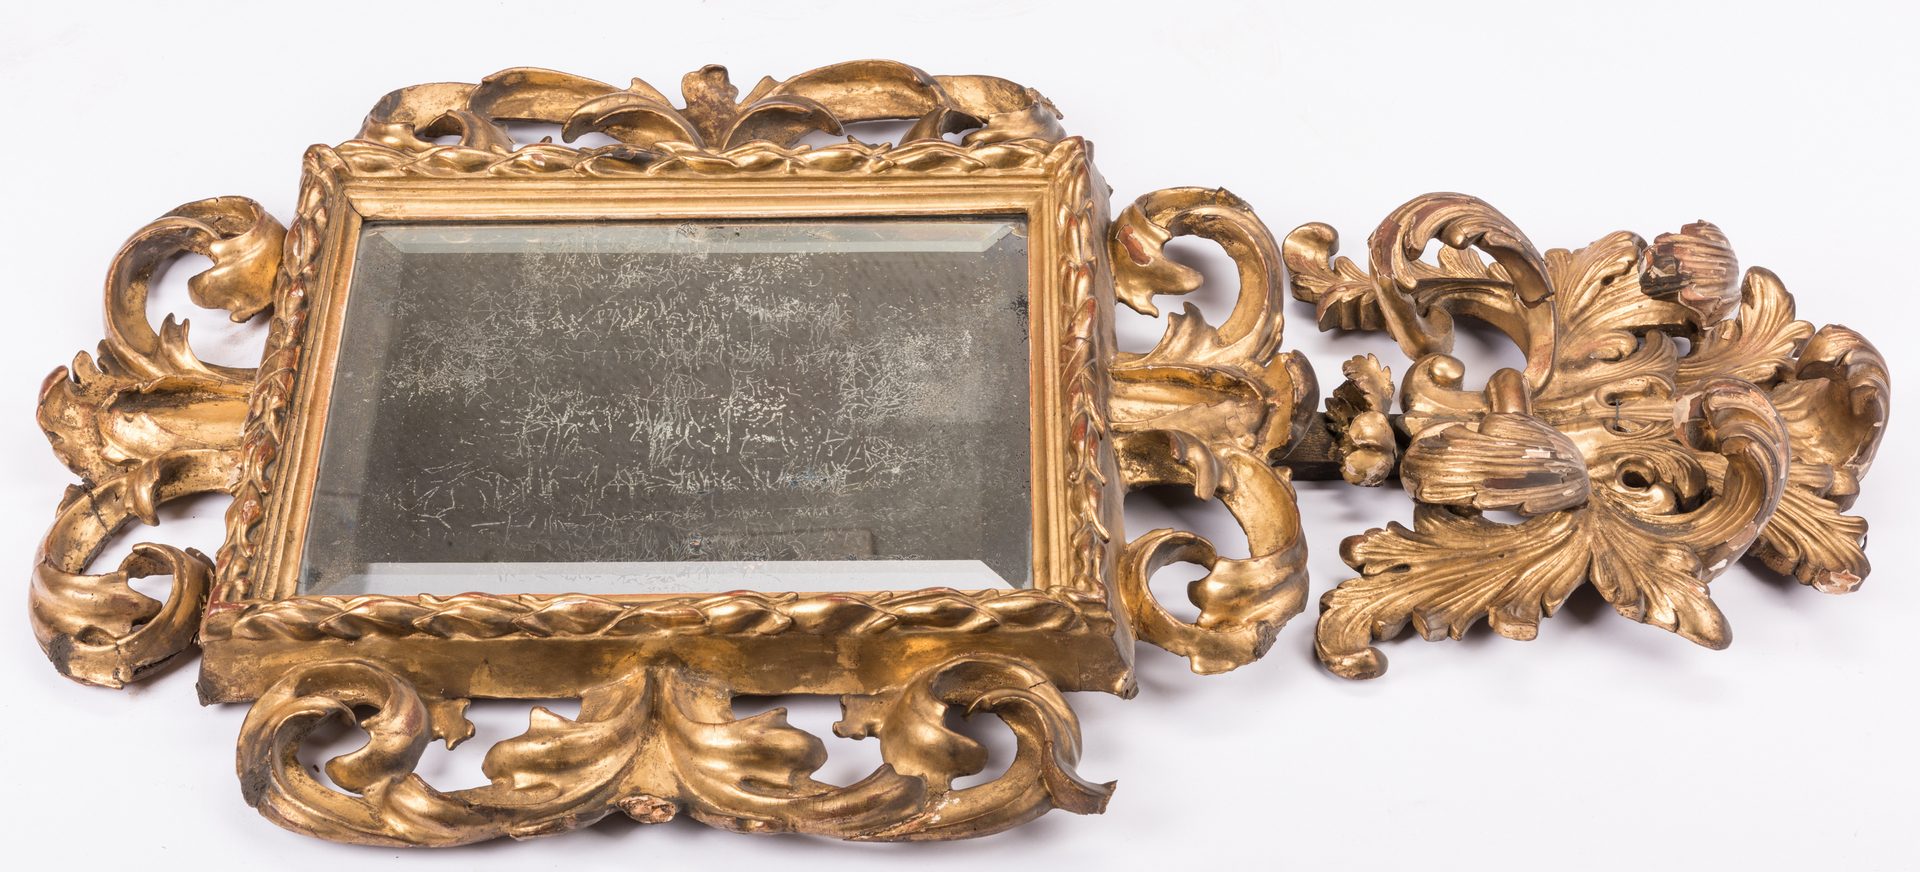 Lot 162: 19th Cent. Continental Gilt Carved Mirror | Case Auctions